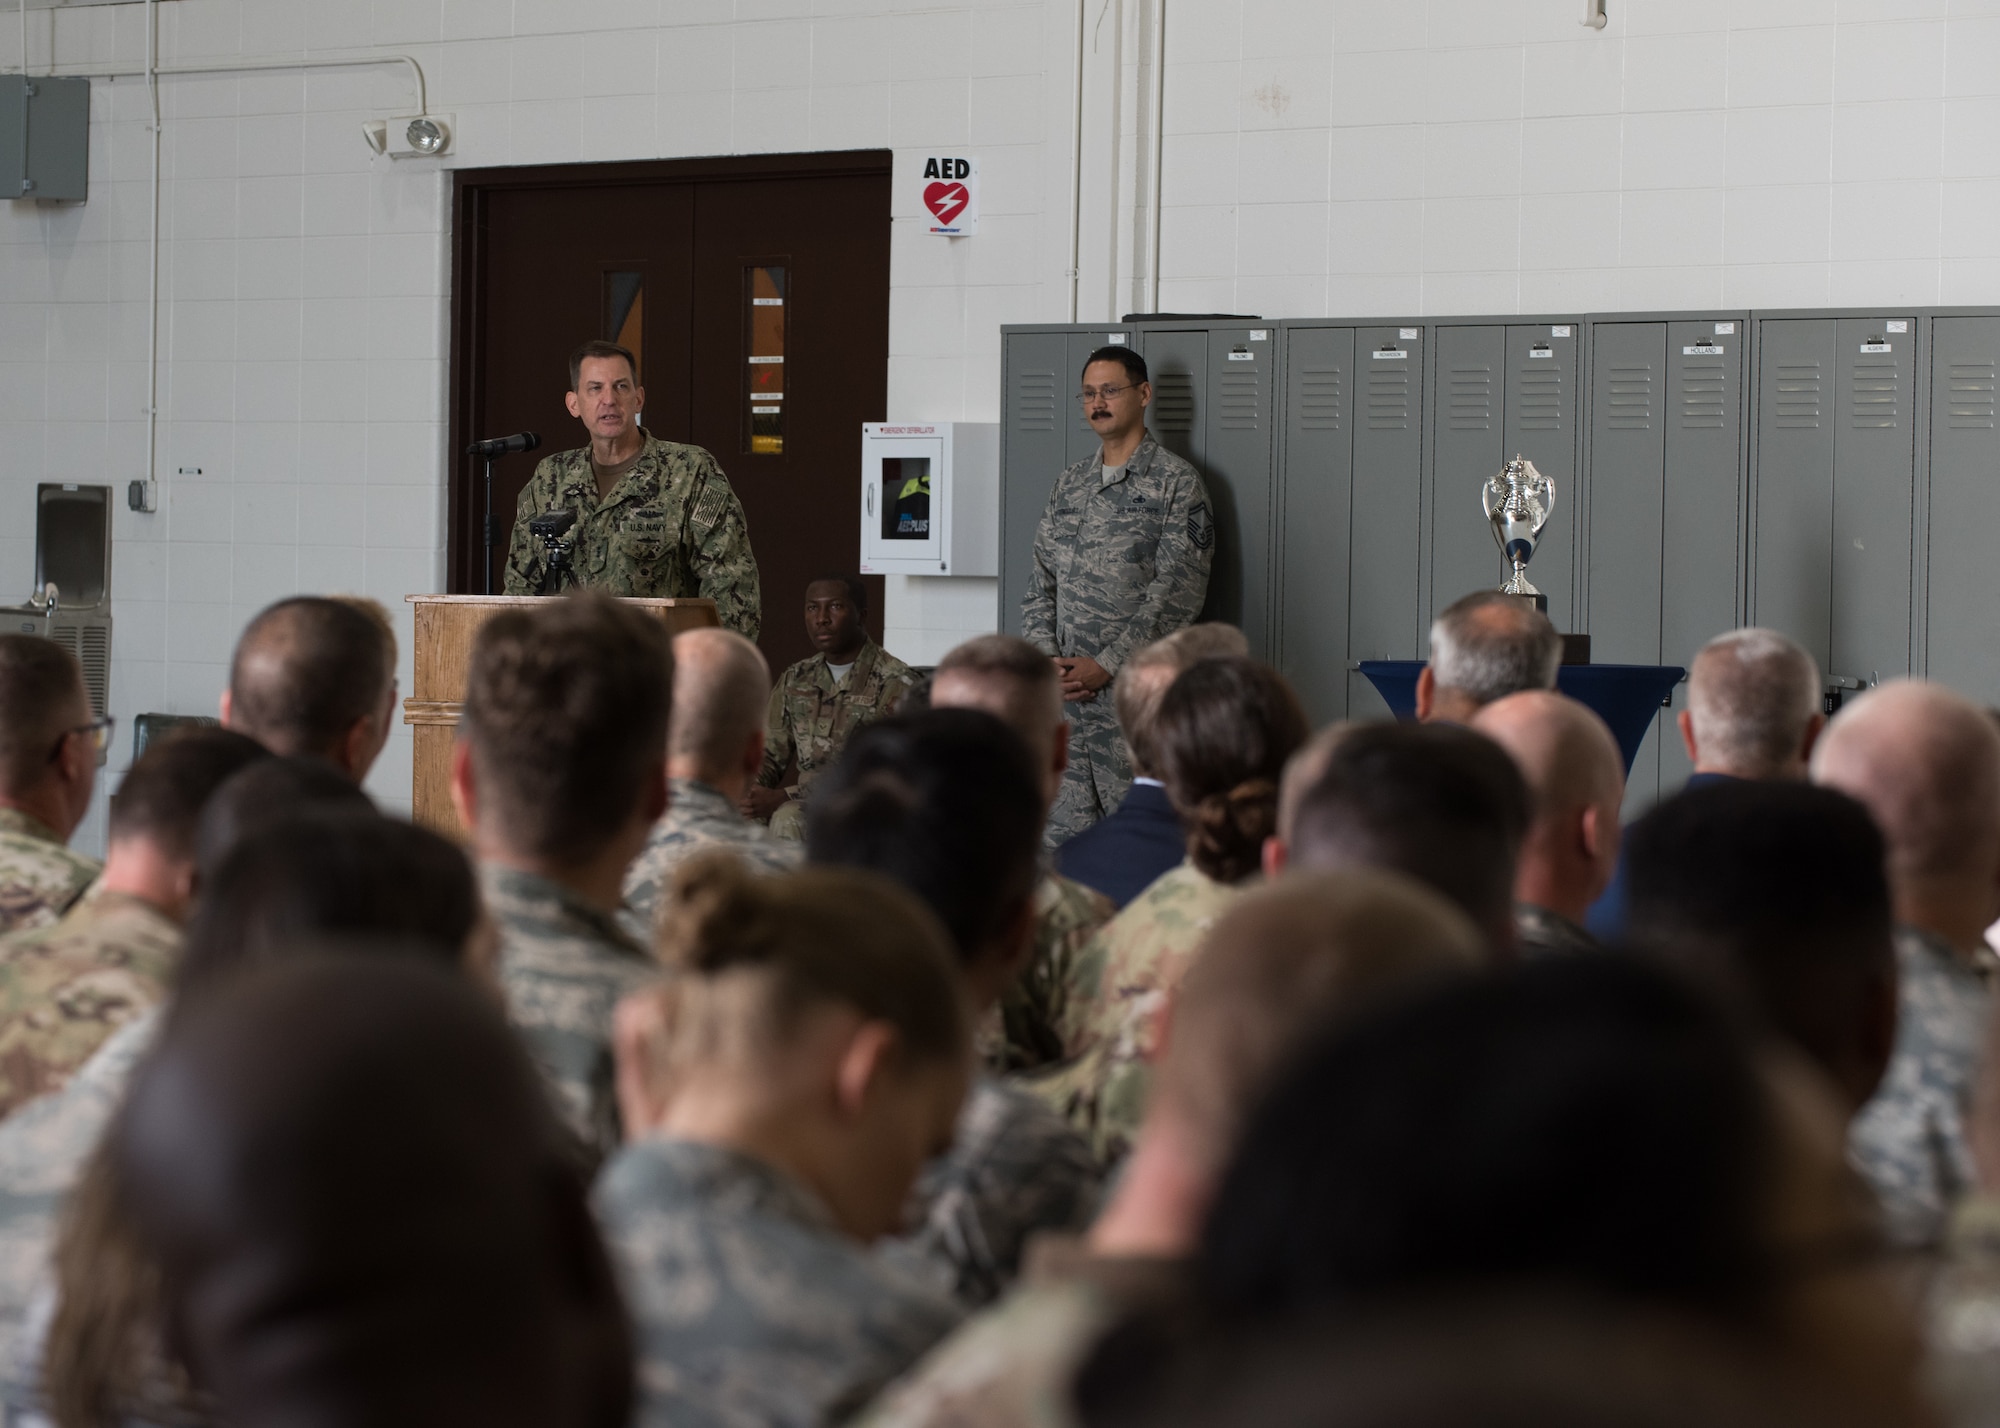 U.S. Navy Vice Adm. Dave Kriete, deputy commander of U.S. Strategic Command speaks to Airmen during the Omaha Trophy presentation Aug. 27, 2019, at Whiteman Air Force Base, Missouri. The Omaha Trophy is awarded to units for excellence in strategic deterrence and support of global strike operations. The active-duty 509th Bomb Wing and Missouri Air National Guard’s 131st Bomb Wing jointly earned the Omaha Trophy because of their interoperability to execute one of the country’s most important national security missions: nuclear deterrence by utilizing the B-2 Spirit stealth bomber to deter adversaries and assure our allies. (U.S. Air Force photo by Airman 1st Class Parker J. McCauley)